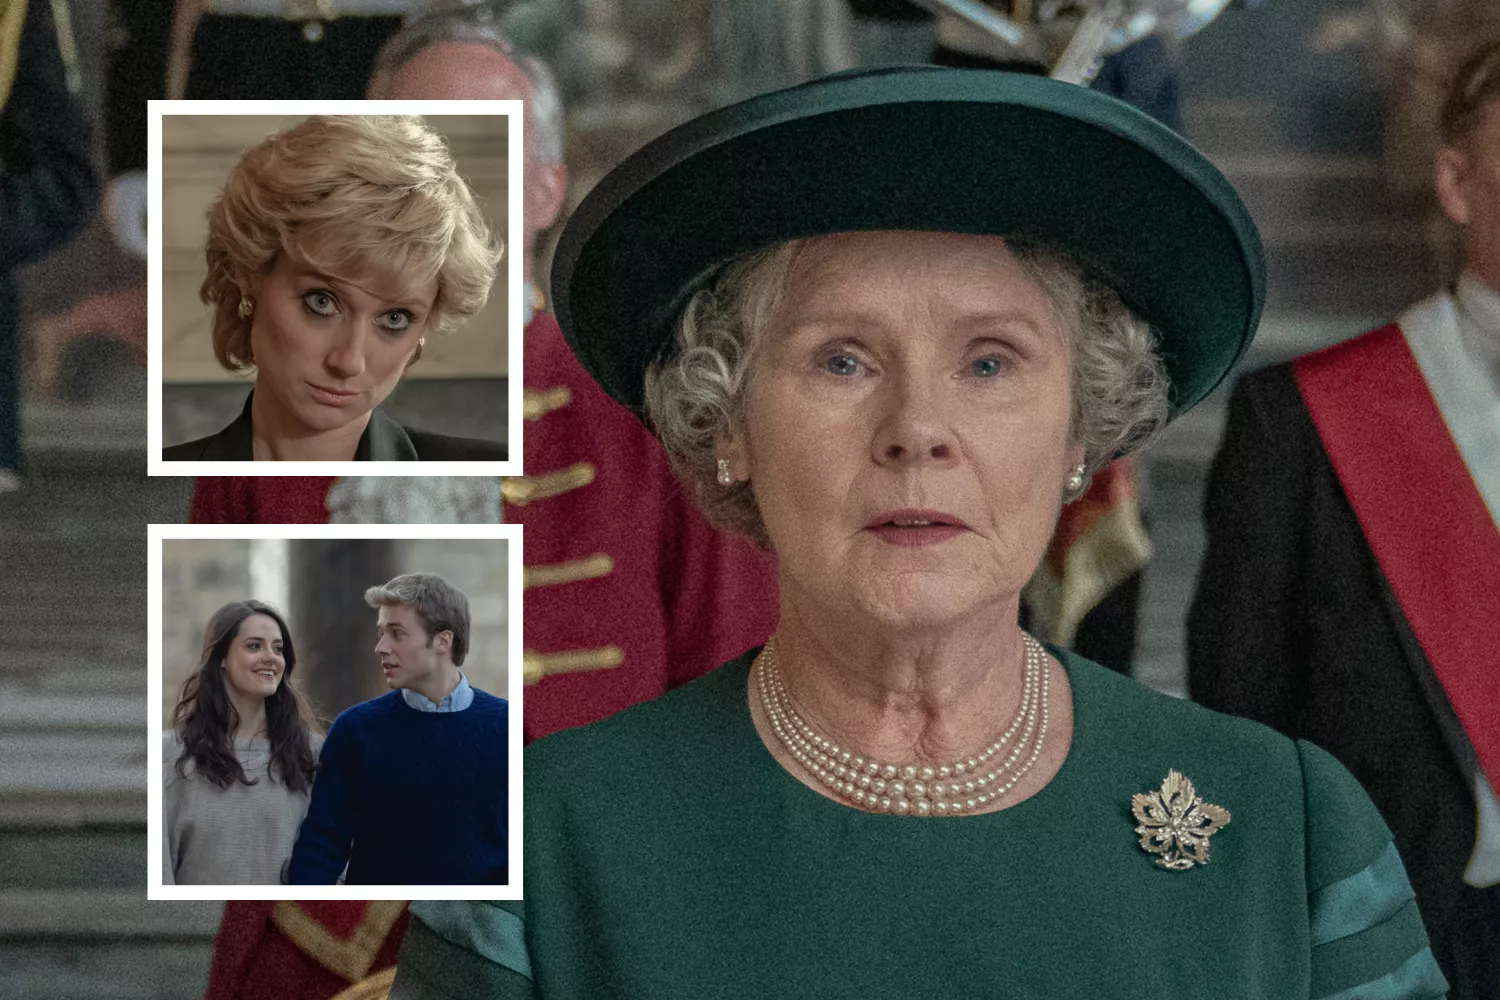 Main image, Imelda Staunton as Queen Elizabeth II in The Crown. Inset, top, Elizabeth Debicki as Princess Diana and inset, bottom, Ed McVey and Meg Bellamy as Prince William and Kate Middleton. The sixth season of The Crown is set to be the last.